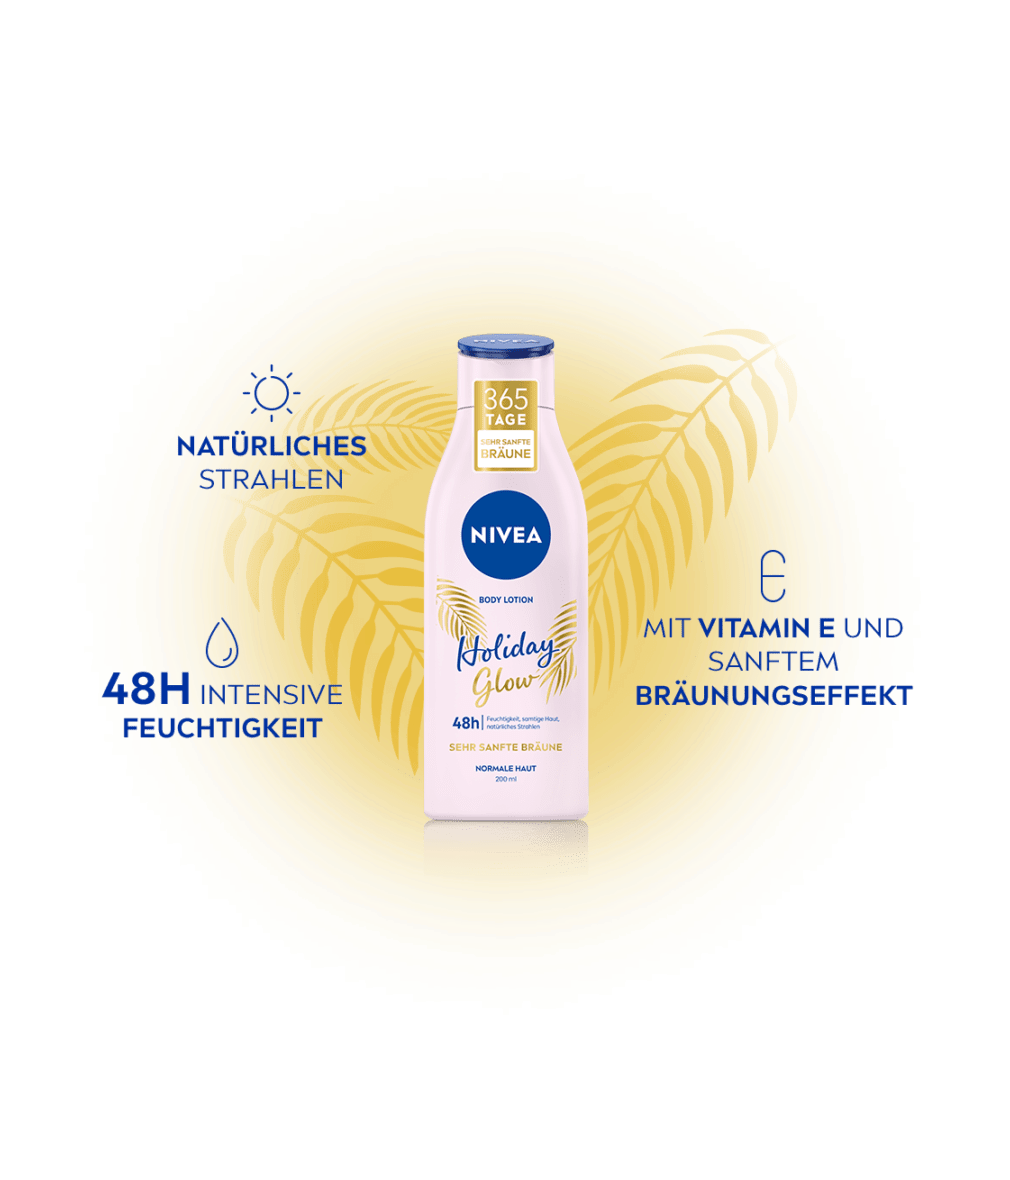 NIVEA HOLIDAY GLOW BODY LOTION SEHR SANFTE BRÄUNE DETAIL